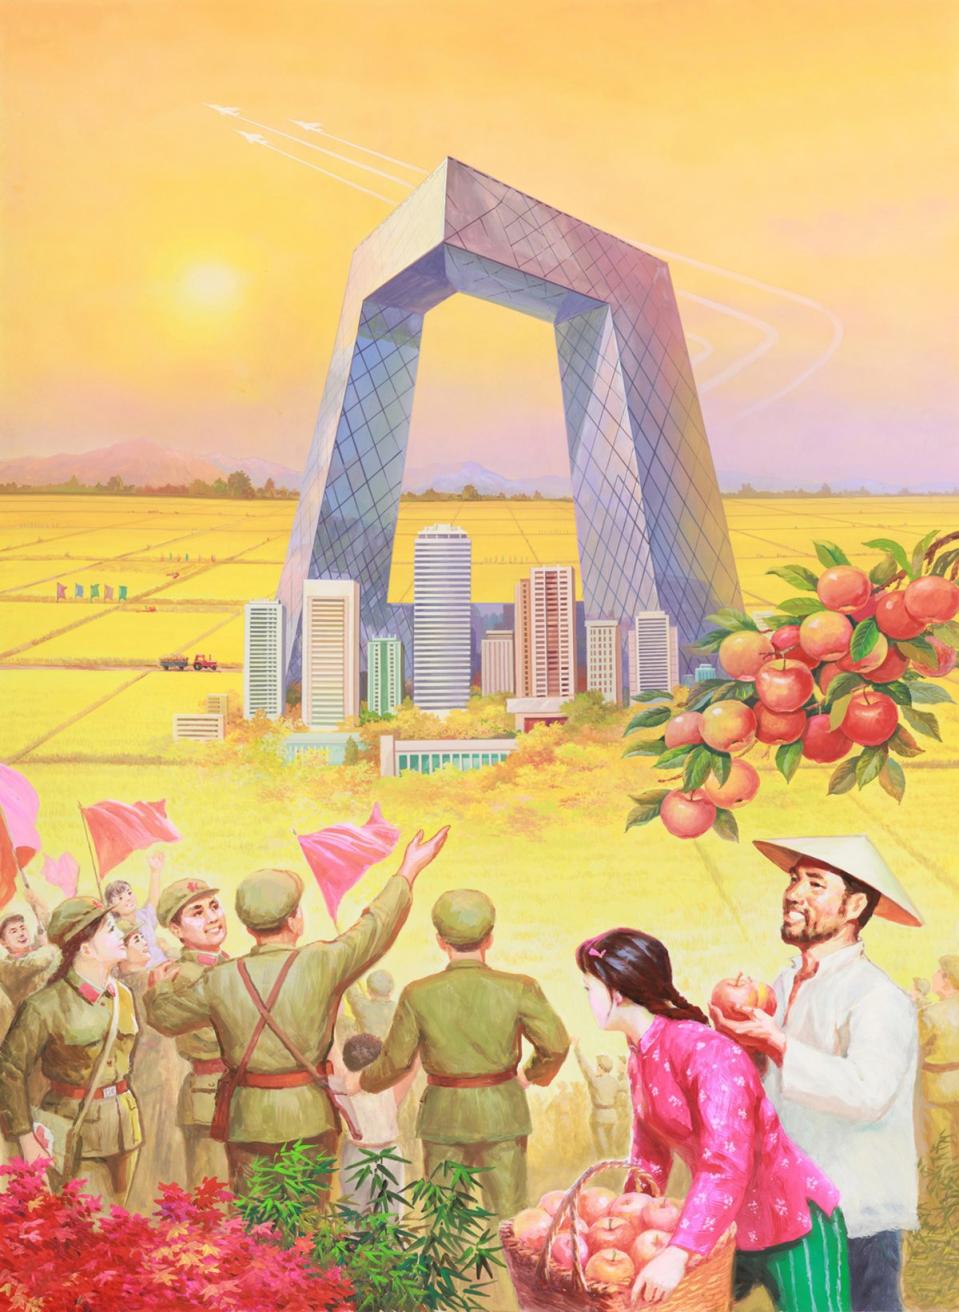 CCTV TOWER WITH BOUNTIFUL HARVEST